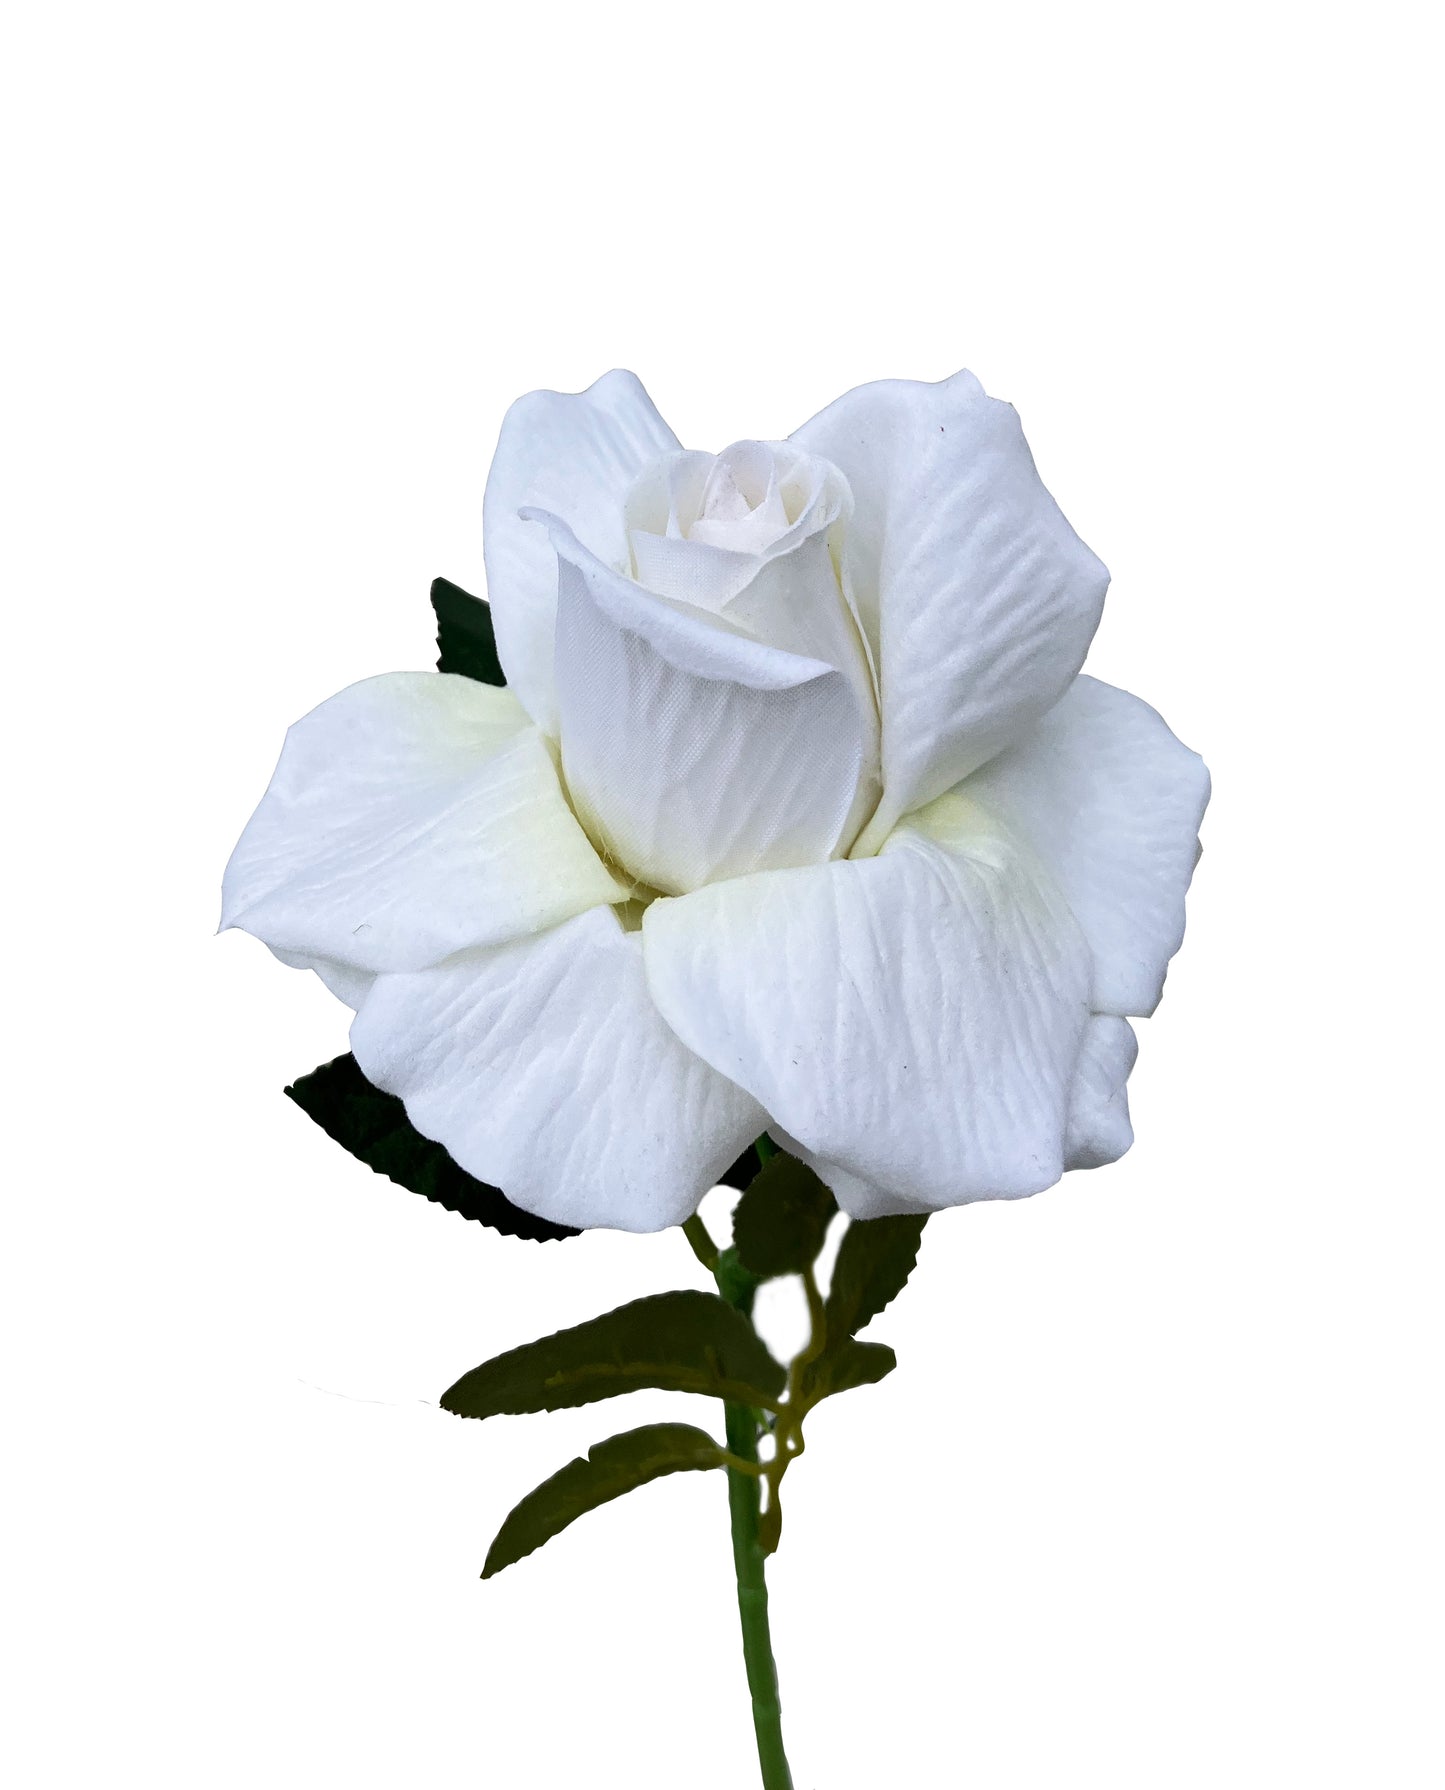 The Classic Artificial Rose Natural White